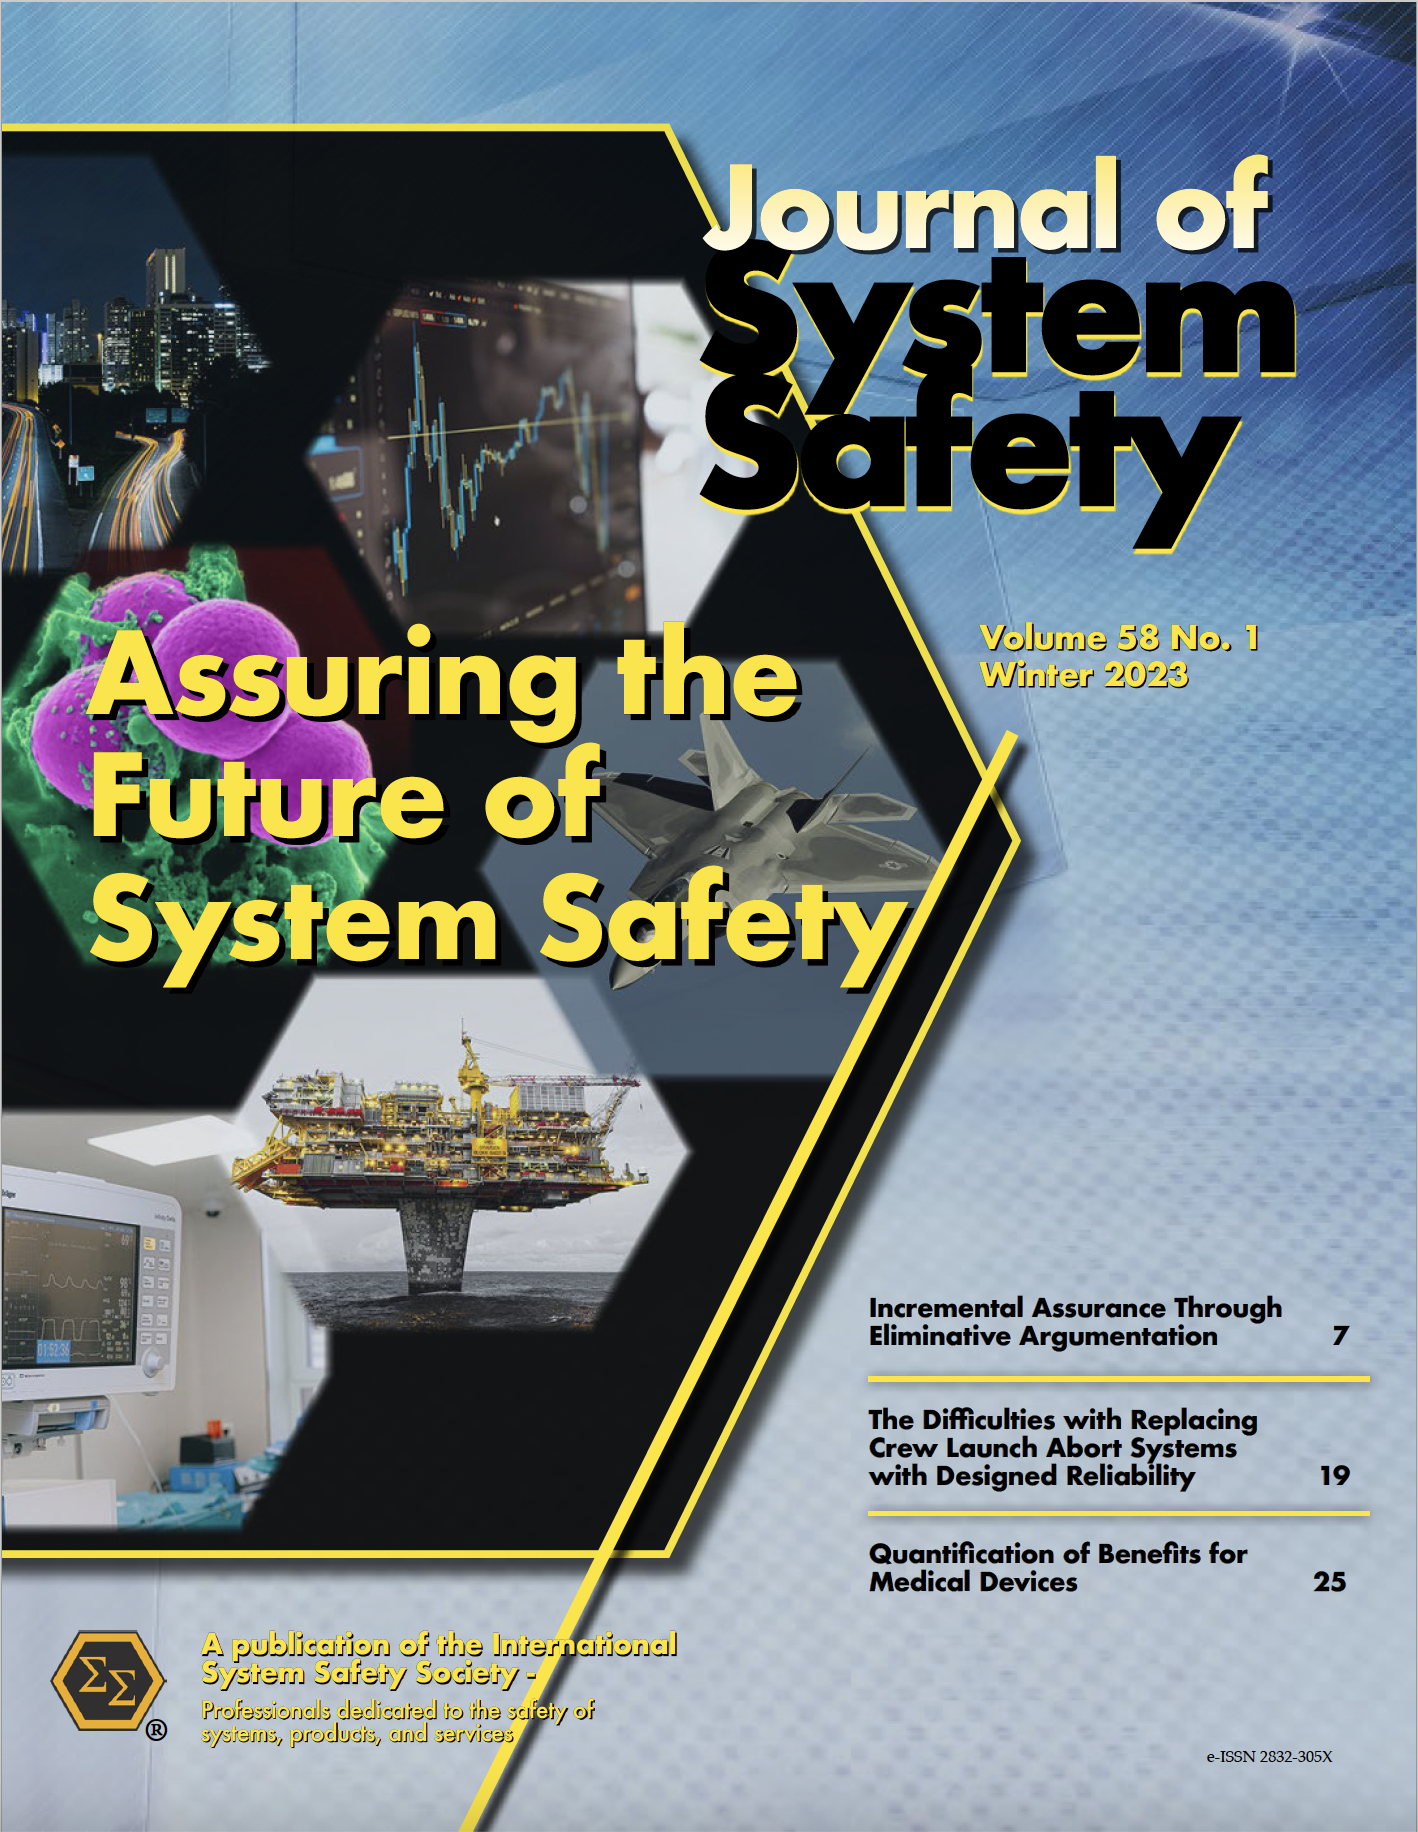 Journal of System Safety, Winter 2023